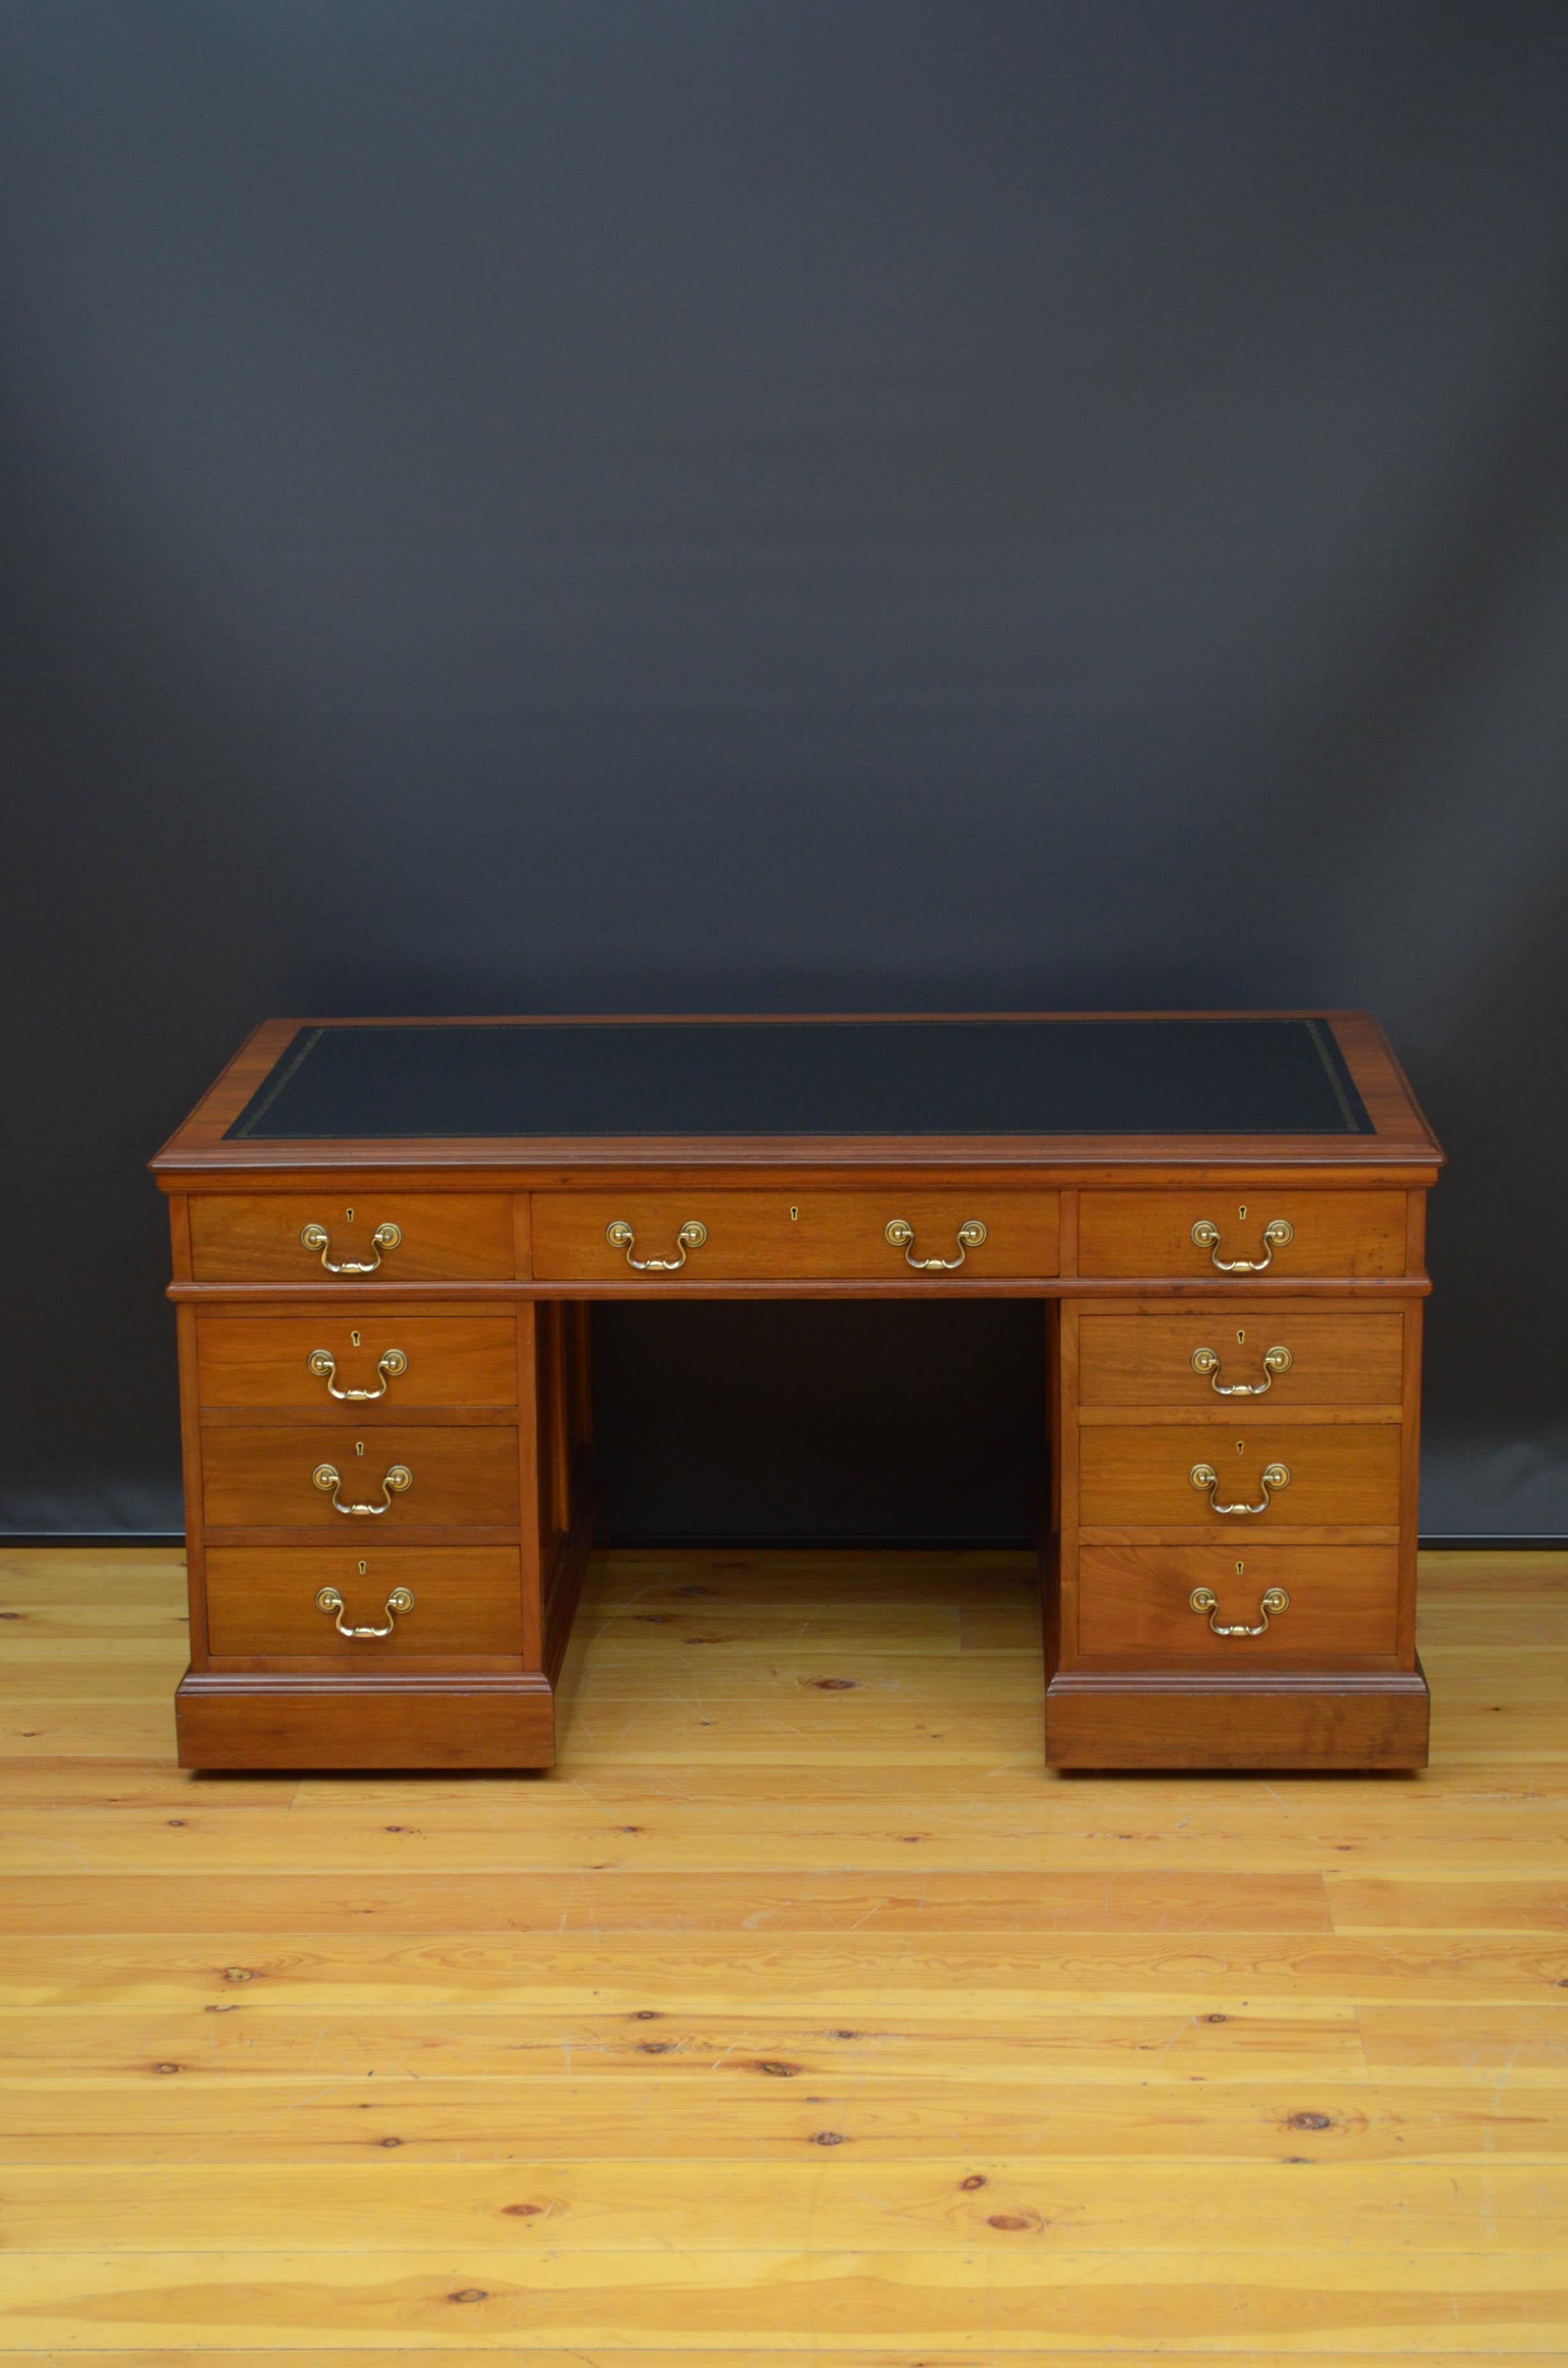 Sn5210 fine quality Edwardian figured walnut desk with fielded panelled sides, having new black tooled leather writing surface and three frieze drawers above further three mahogany lined, graduated drawers to each pedestal and panelled cupboards